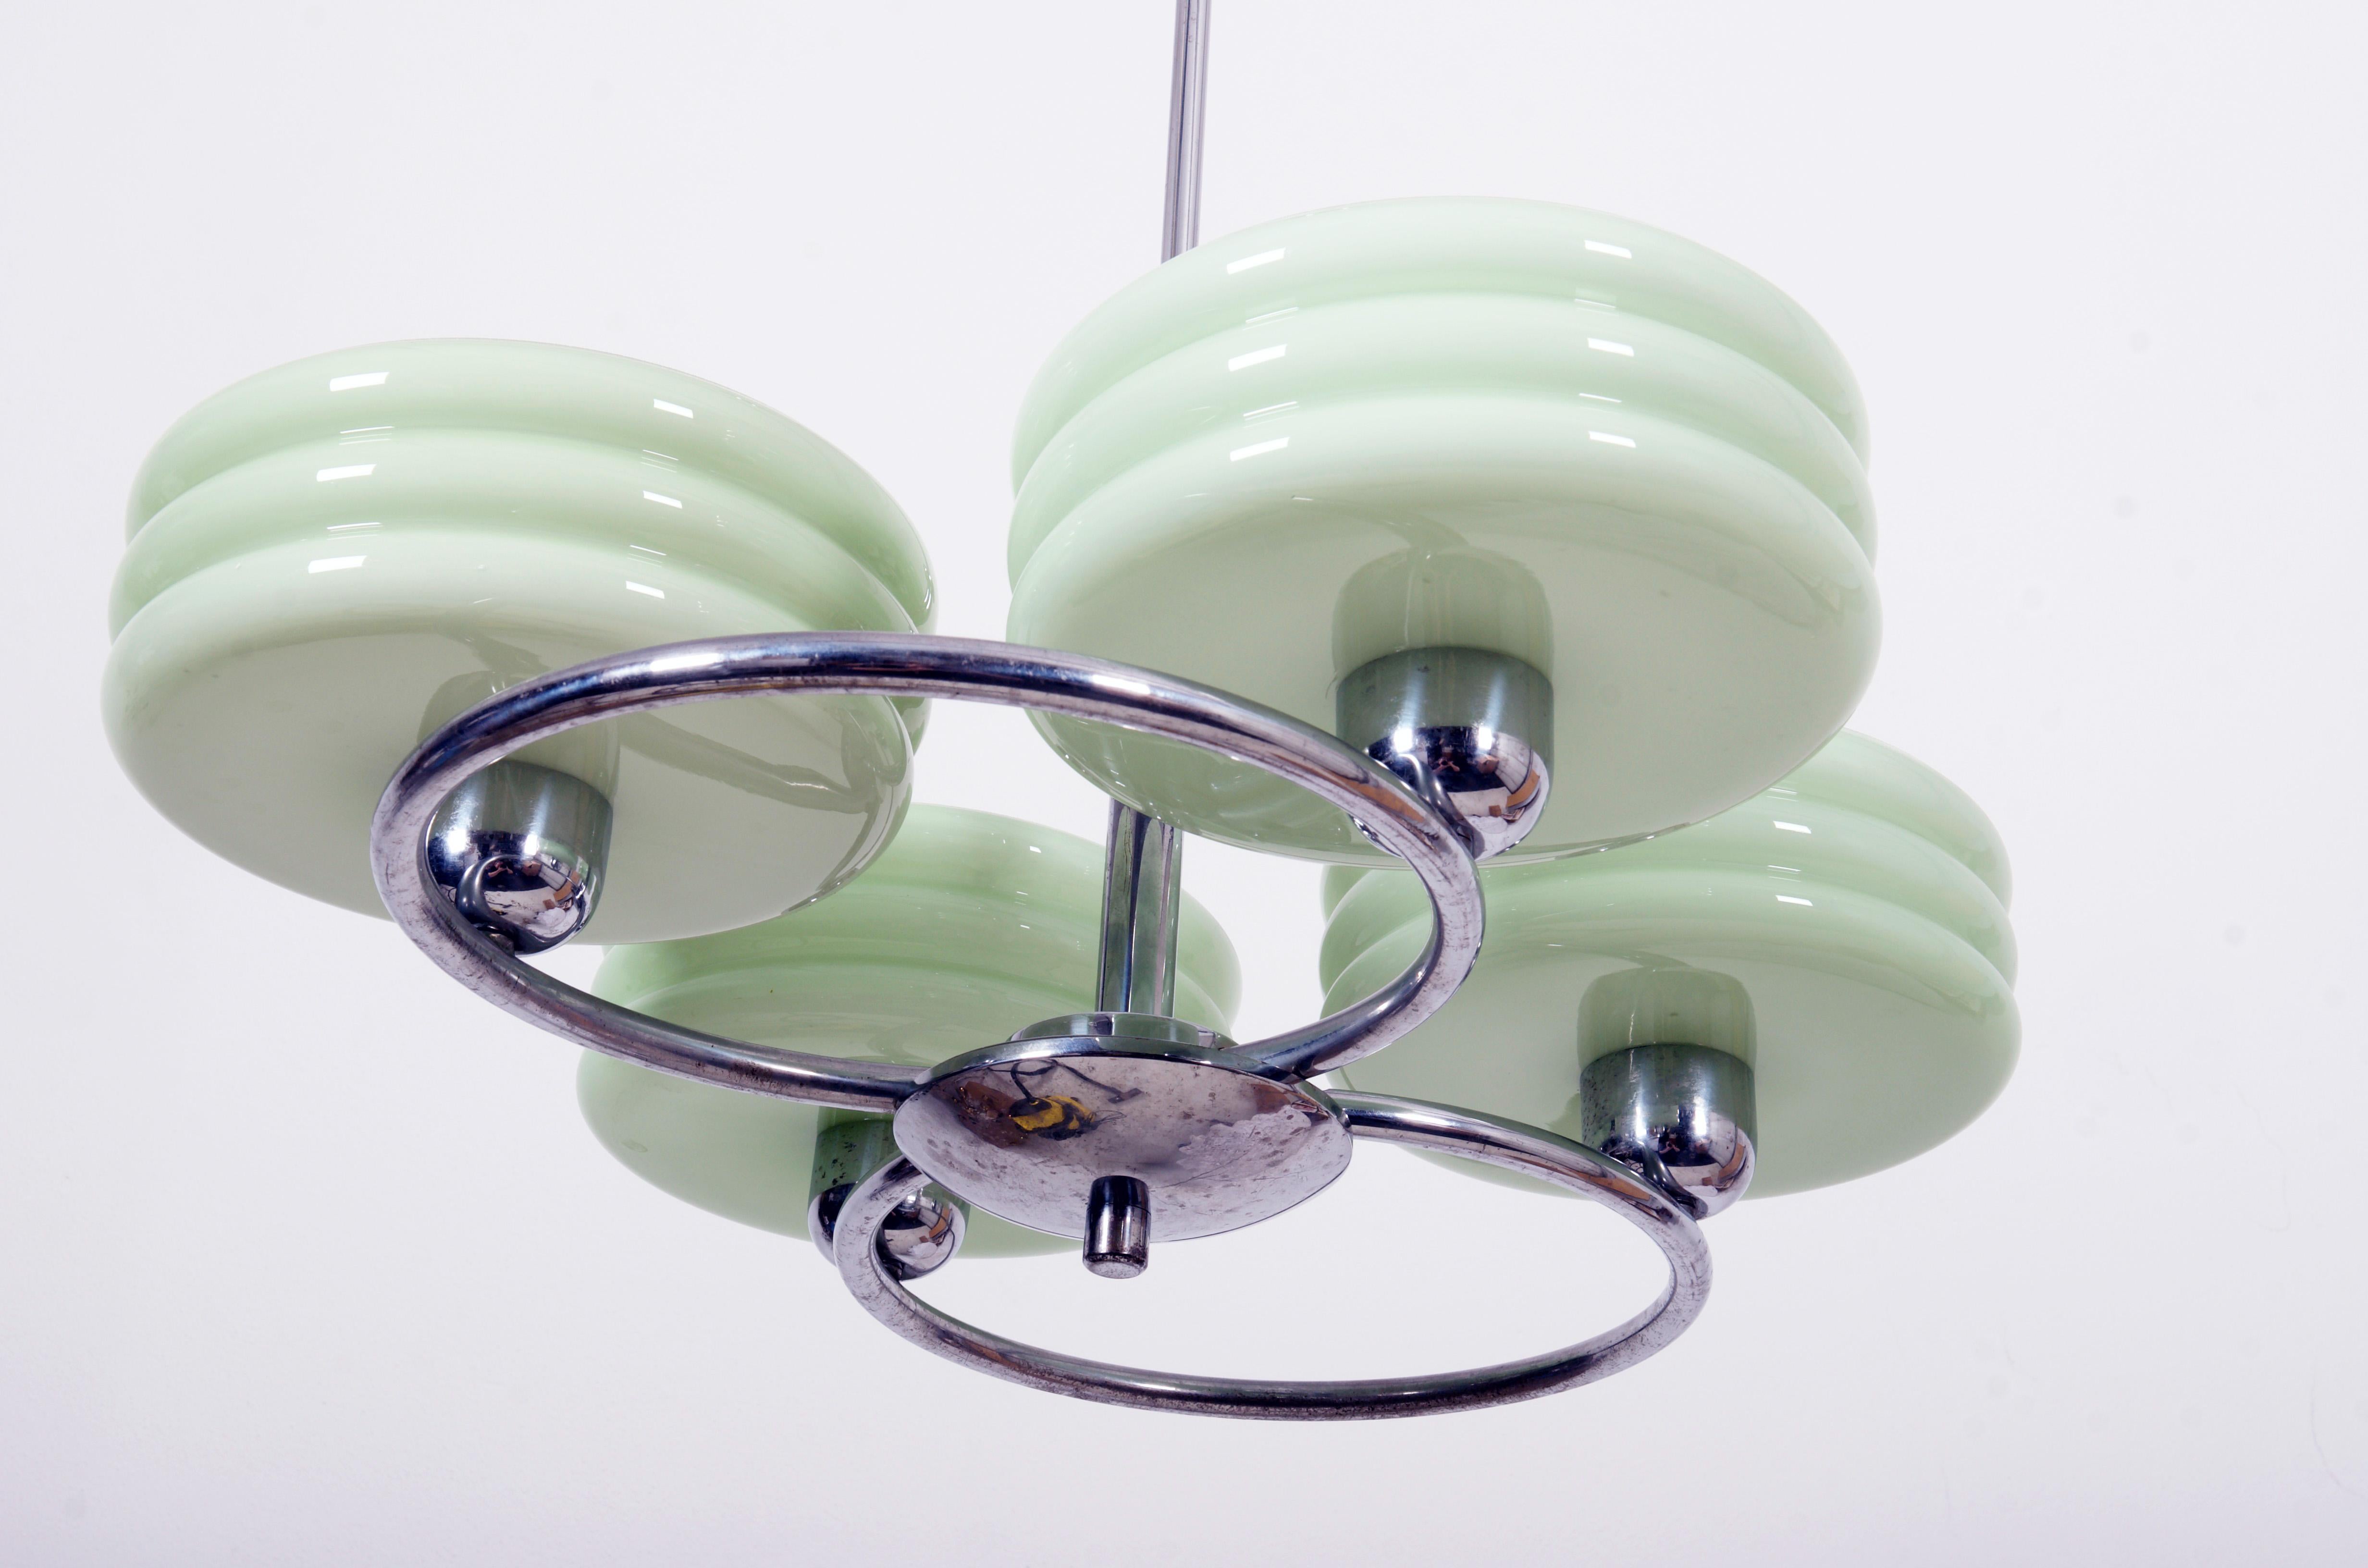 Bras frame chrome-plated, green glass lampshades (pink, beige on request possible)
The body consists of two large chrome circles with a diameter of 285mm each.
Lampshades are shaped like a bowl, interior glass is pure white and light green